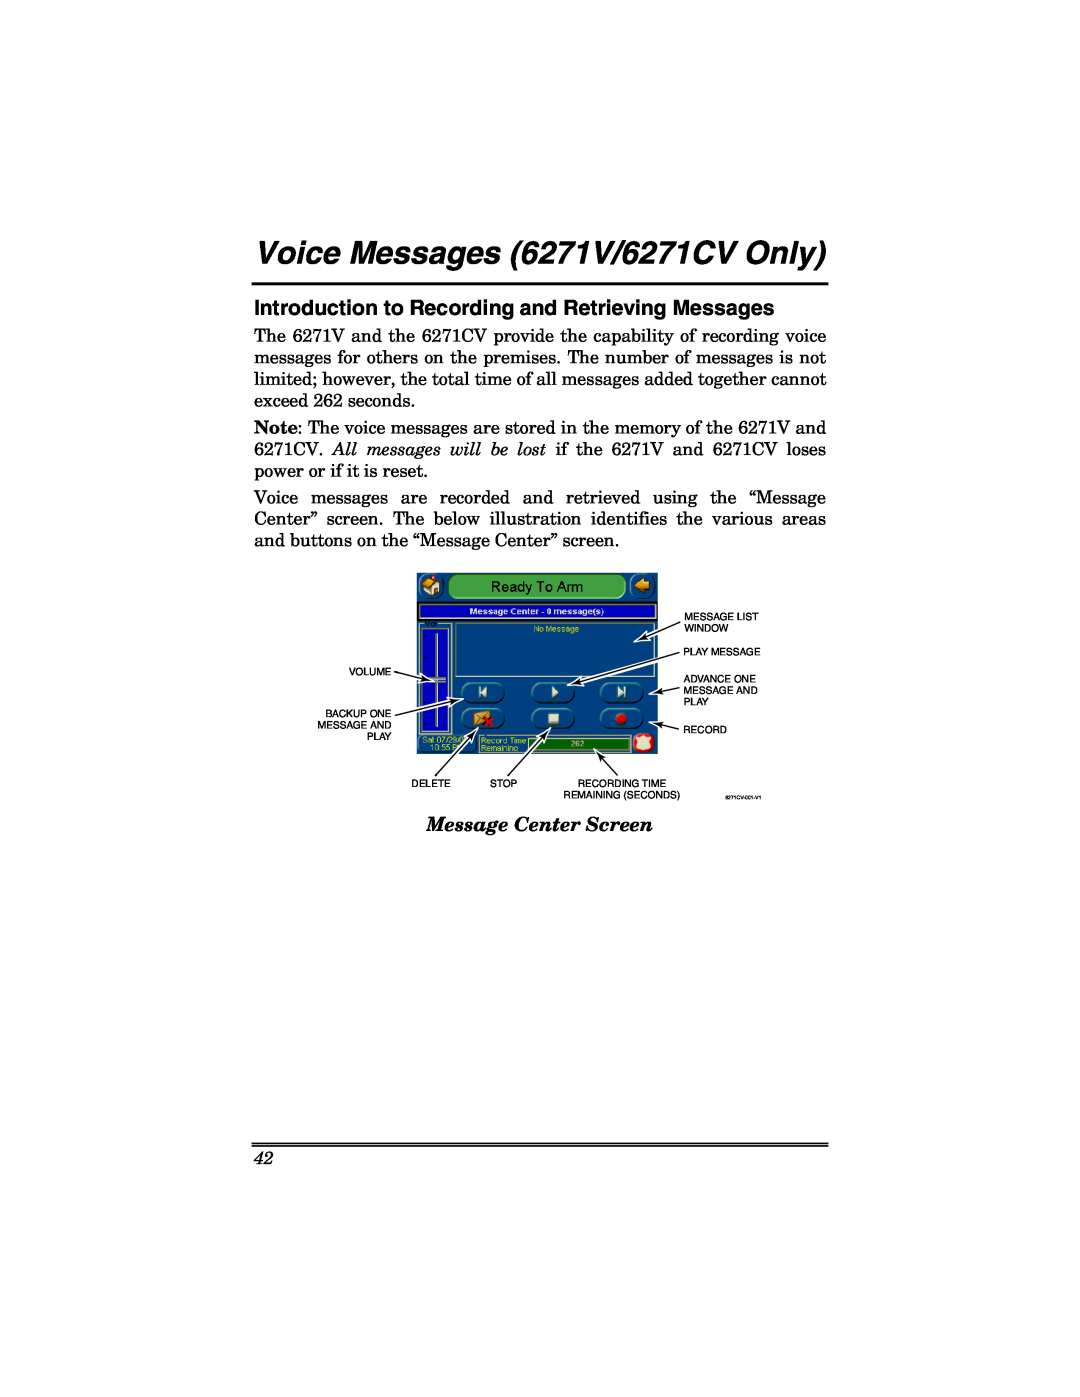 Honeywell Voice Messages 6271V/6271CV Only, Introduction to Recording and Retrieving Messages, Message Center Screen 